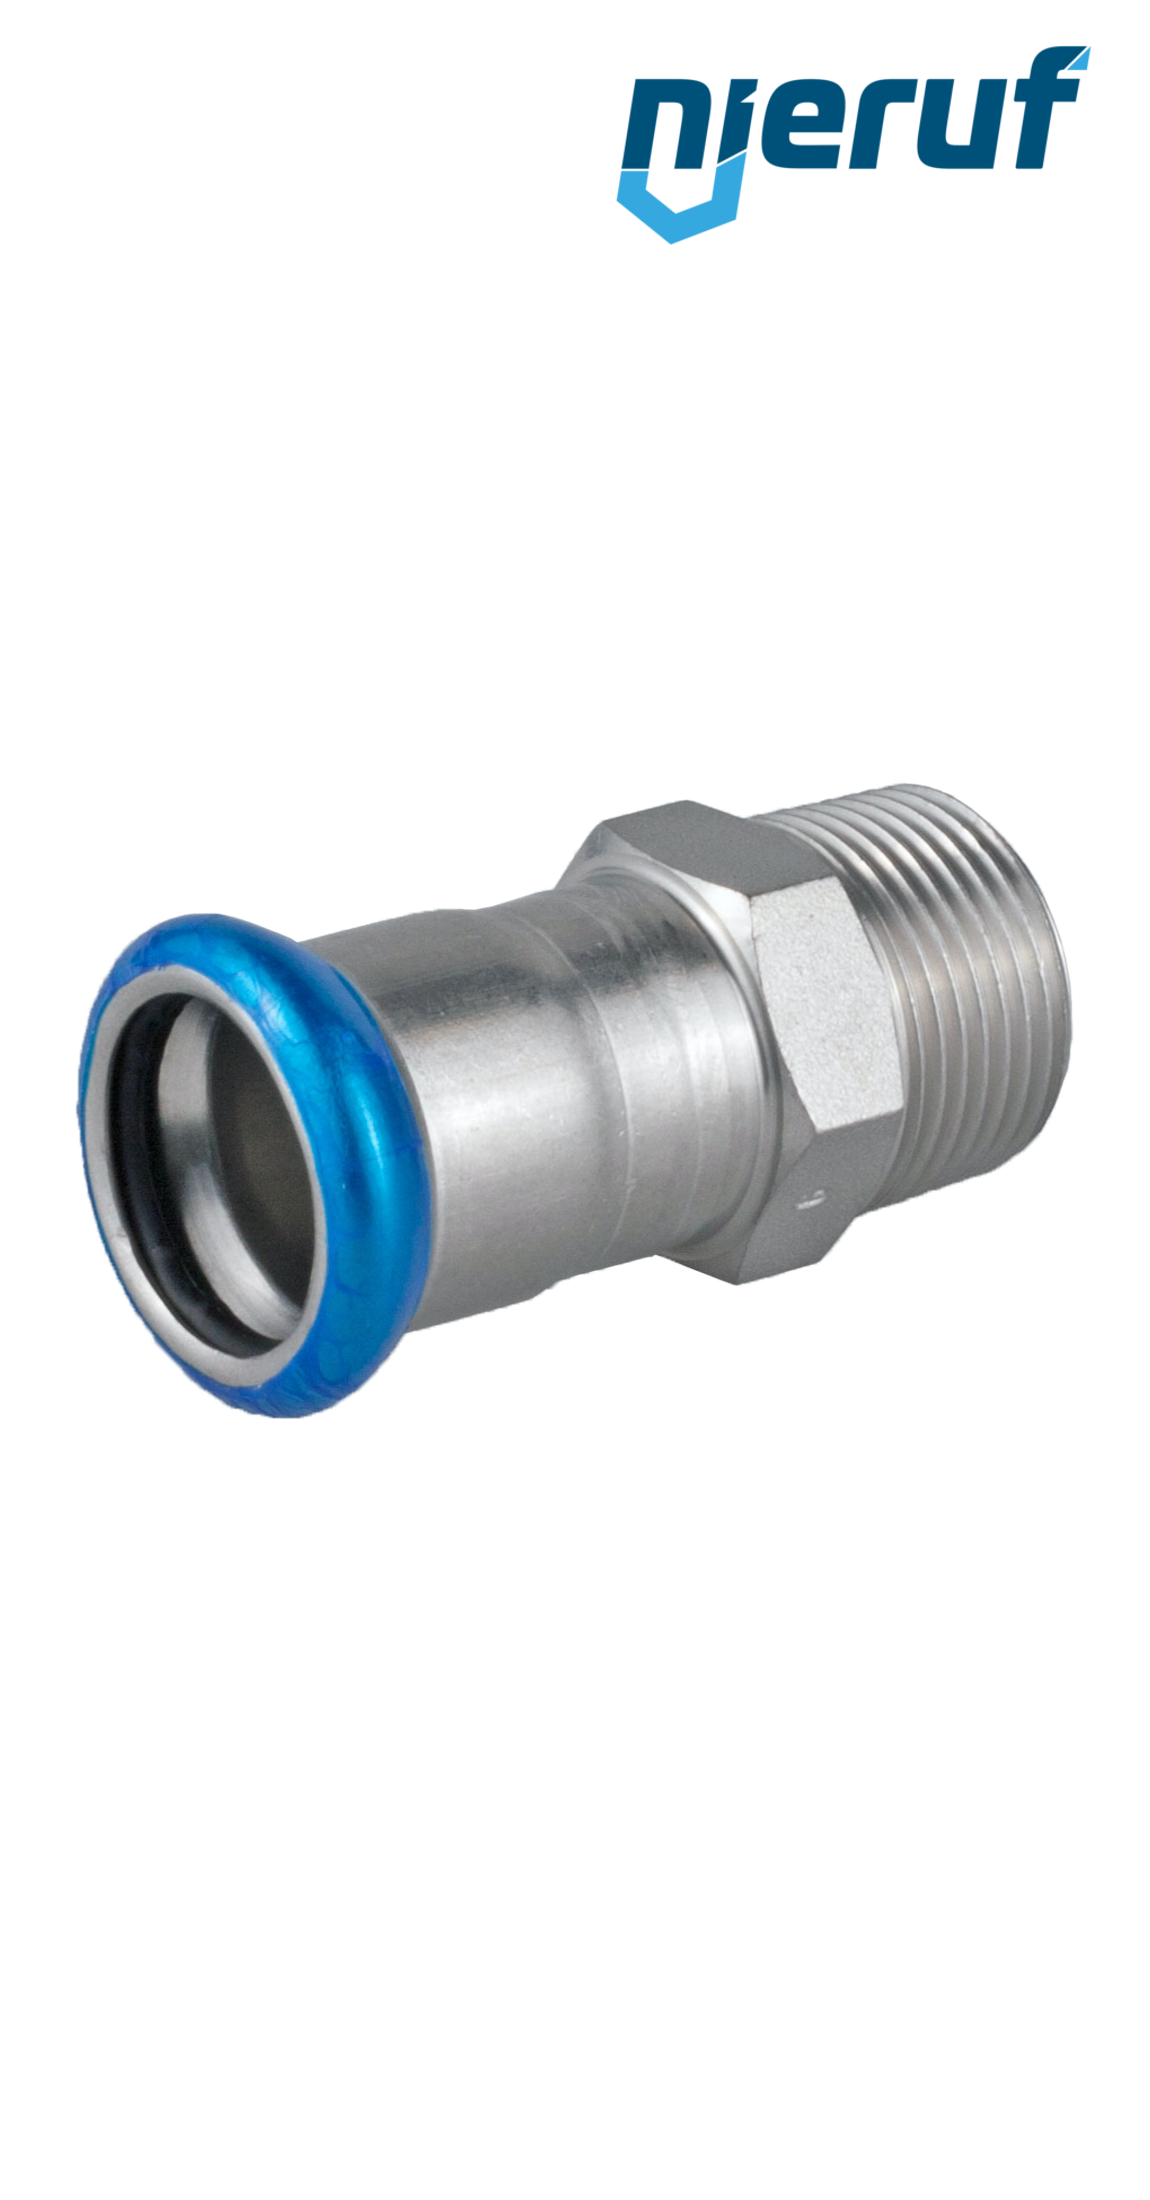 Press Fitting Male Coupling F Pressfitting DN25 - 28,0 mm male thread 1 1/4" inch stainless steel